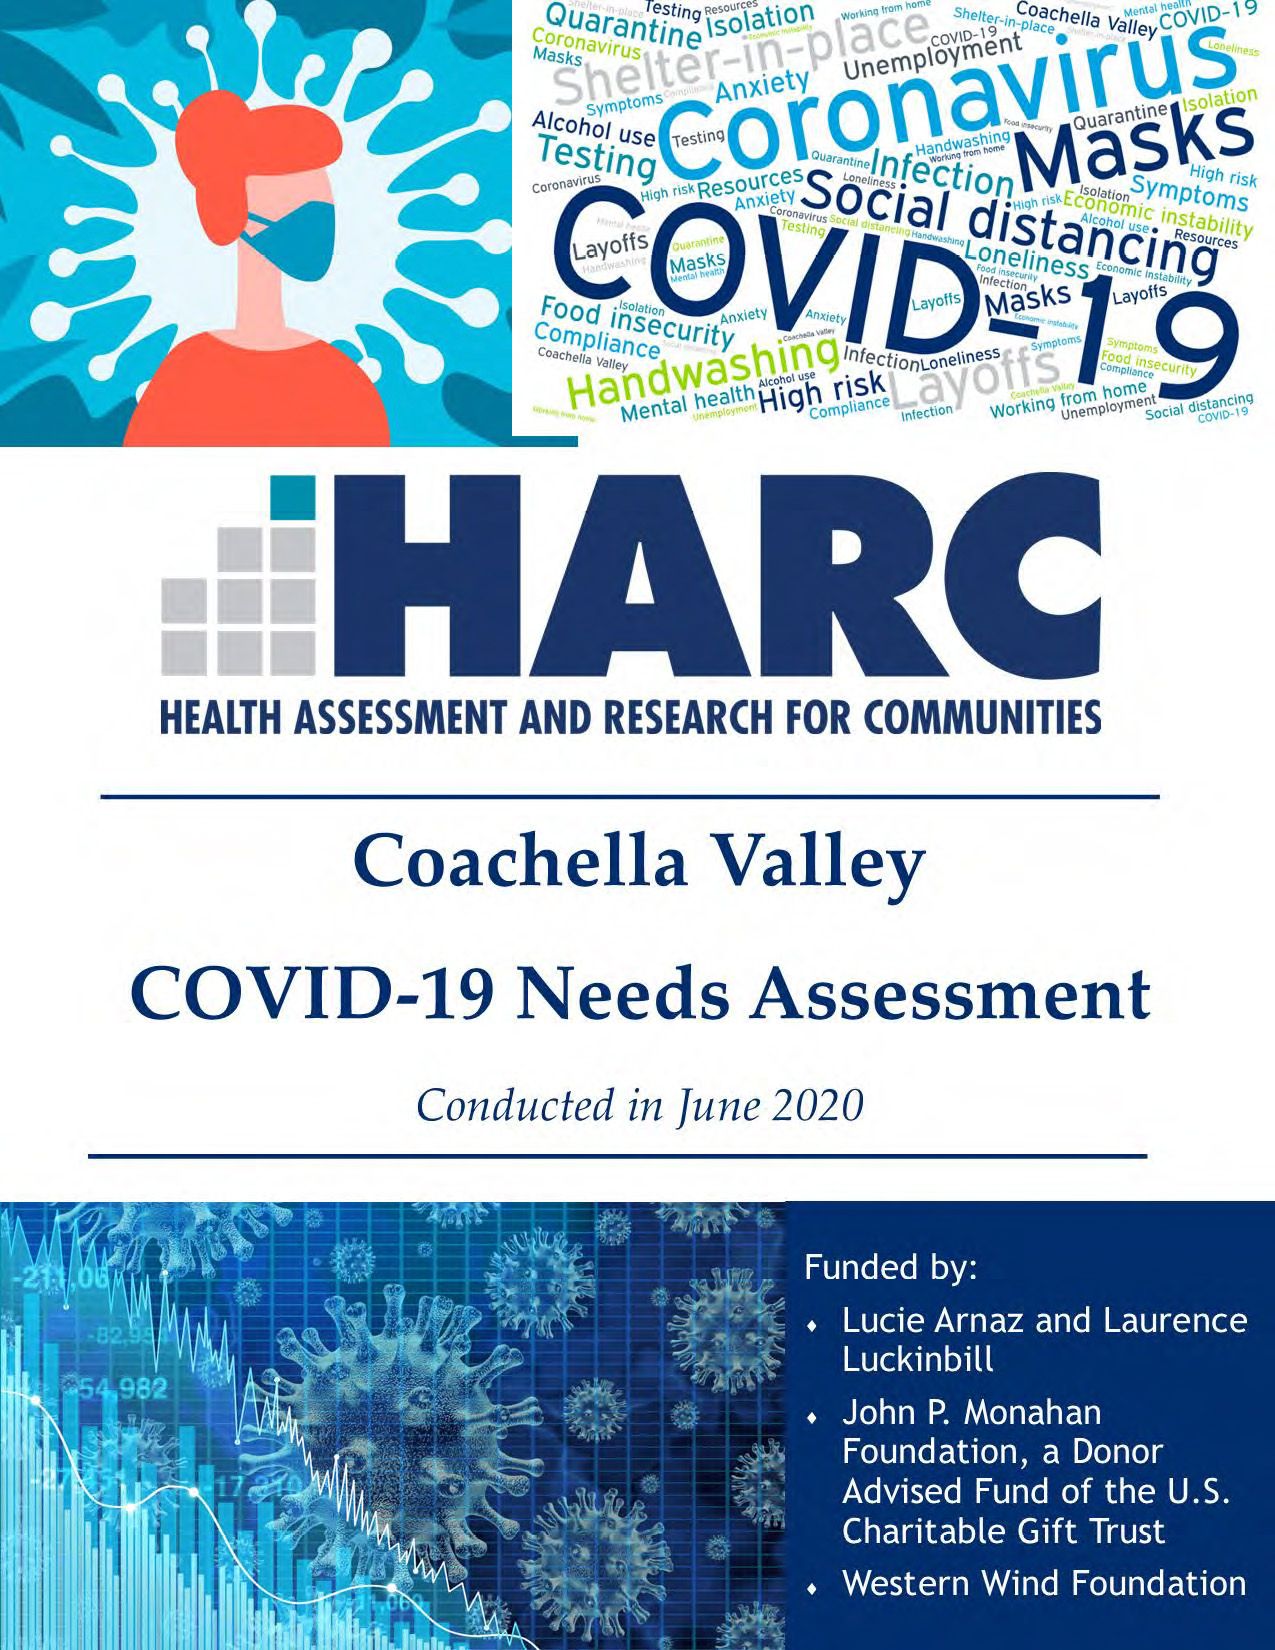 HARC Coachella Valley COVID-19 Needs Assessment conducted in June 2020